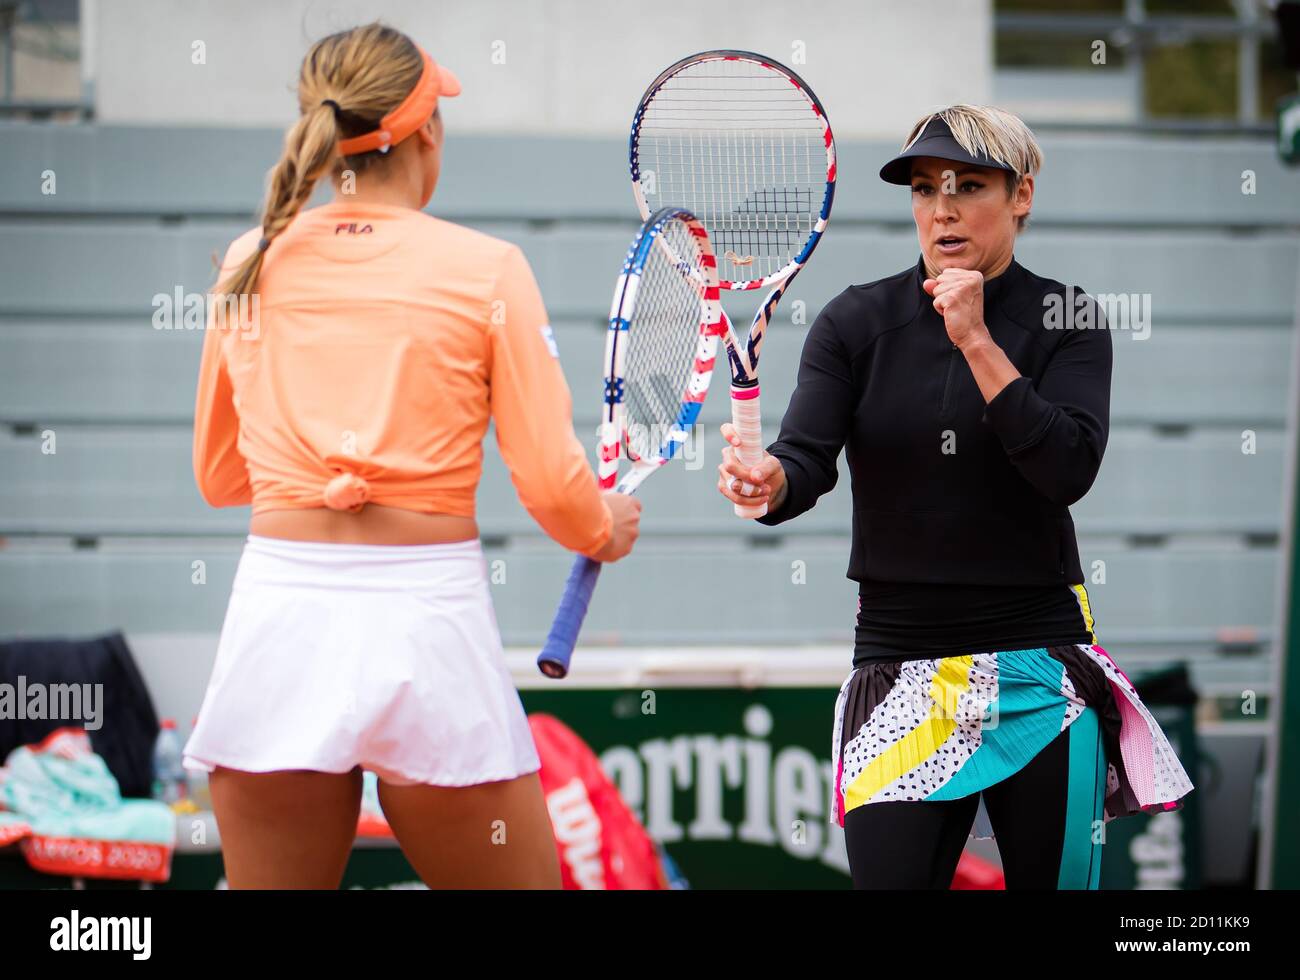 Sofia Kenin and Bethanie Mattek-Sands of the United States playing doubles at the Roland Garros 2020, Grand Slam tennis tournament, on October 4, 2020 Stock Photo